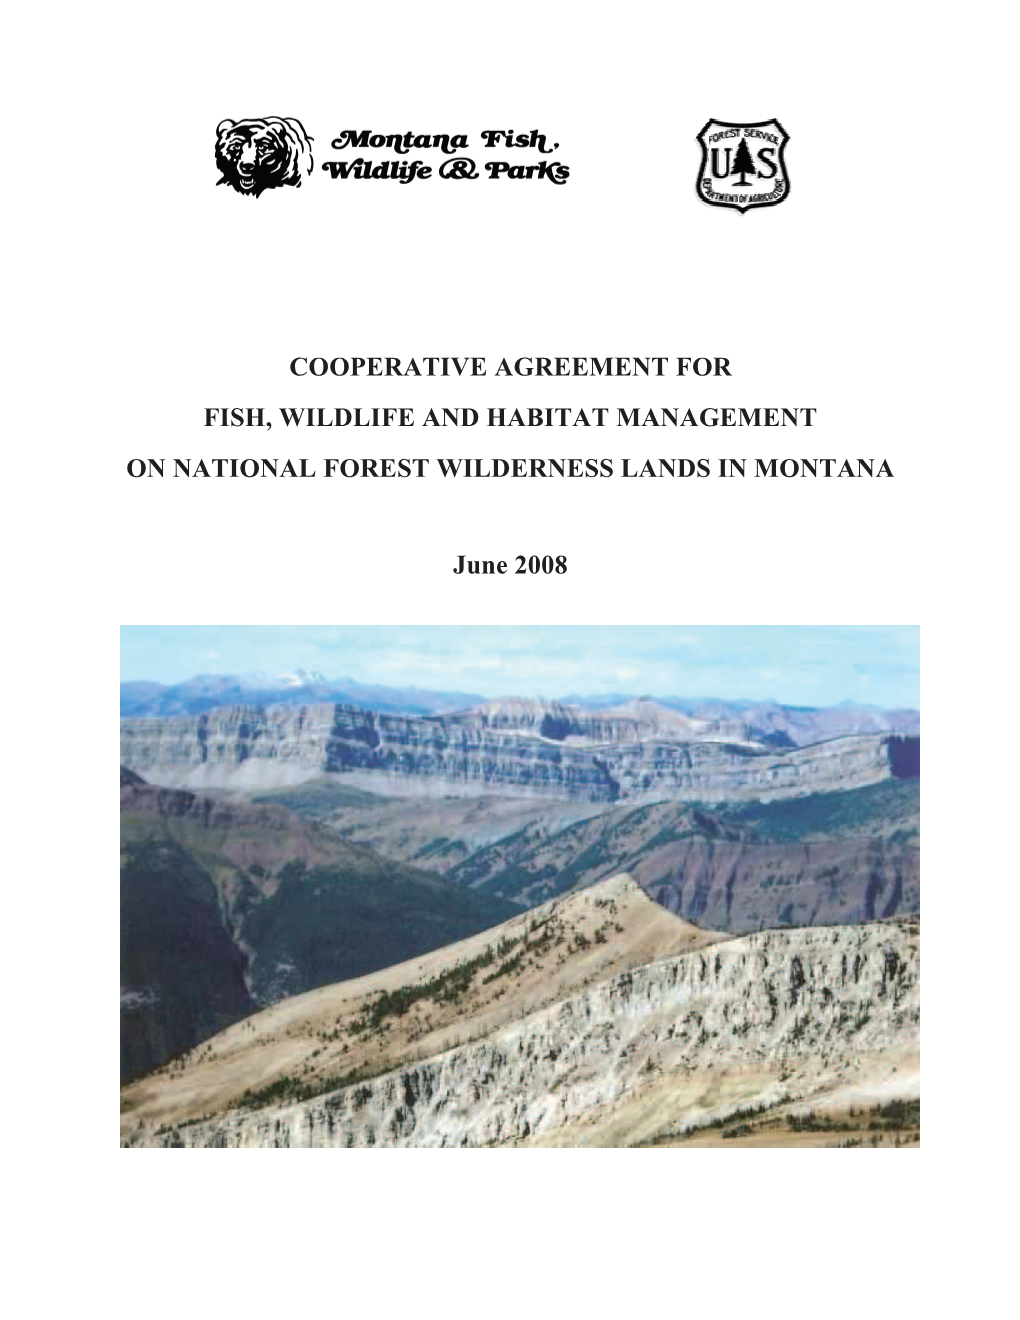 Cooperative Agreement for Fish, Wildlife and Habitat Management on National Forest Wilderness Lands in Montana